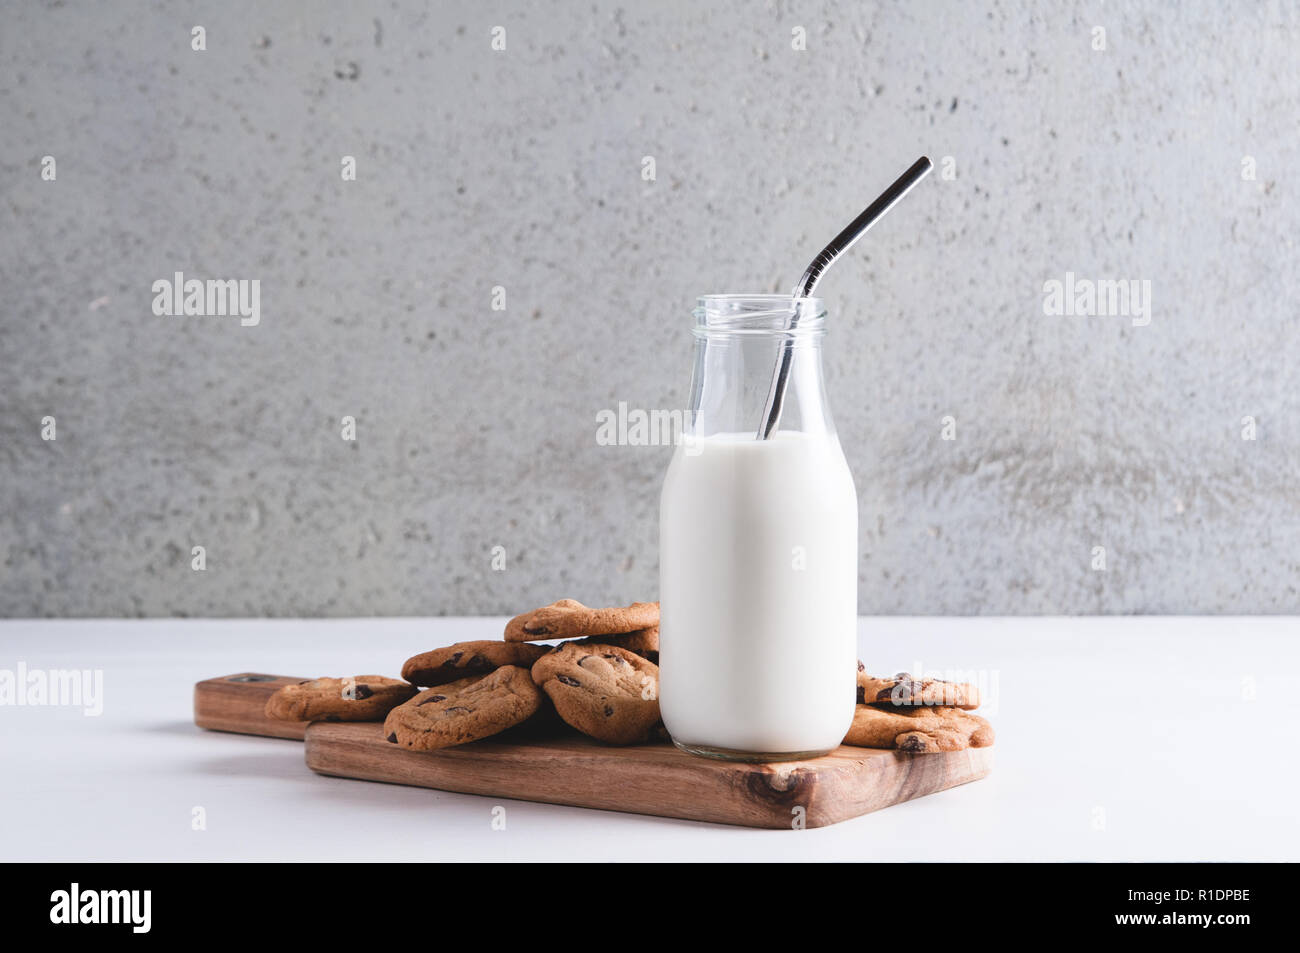 cookies and a bottle of milk with metal staws against a grey concreate background Stock Photo